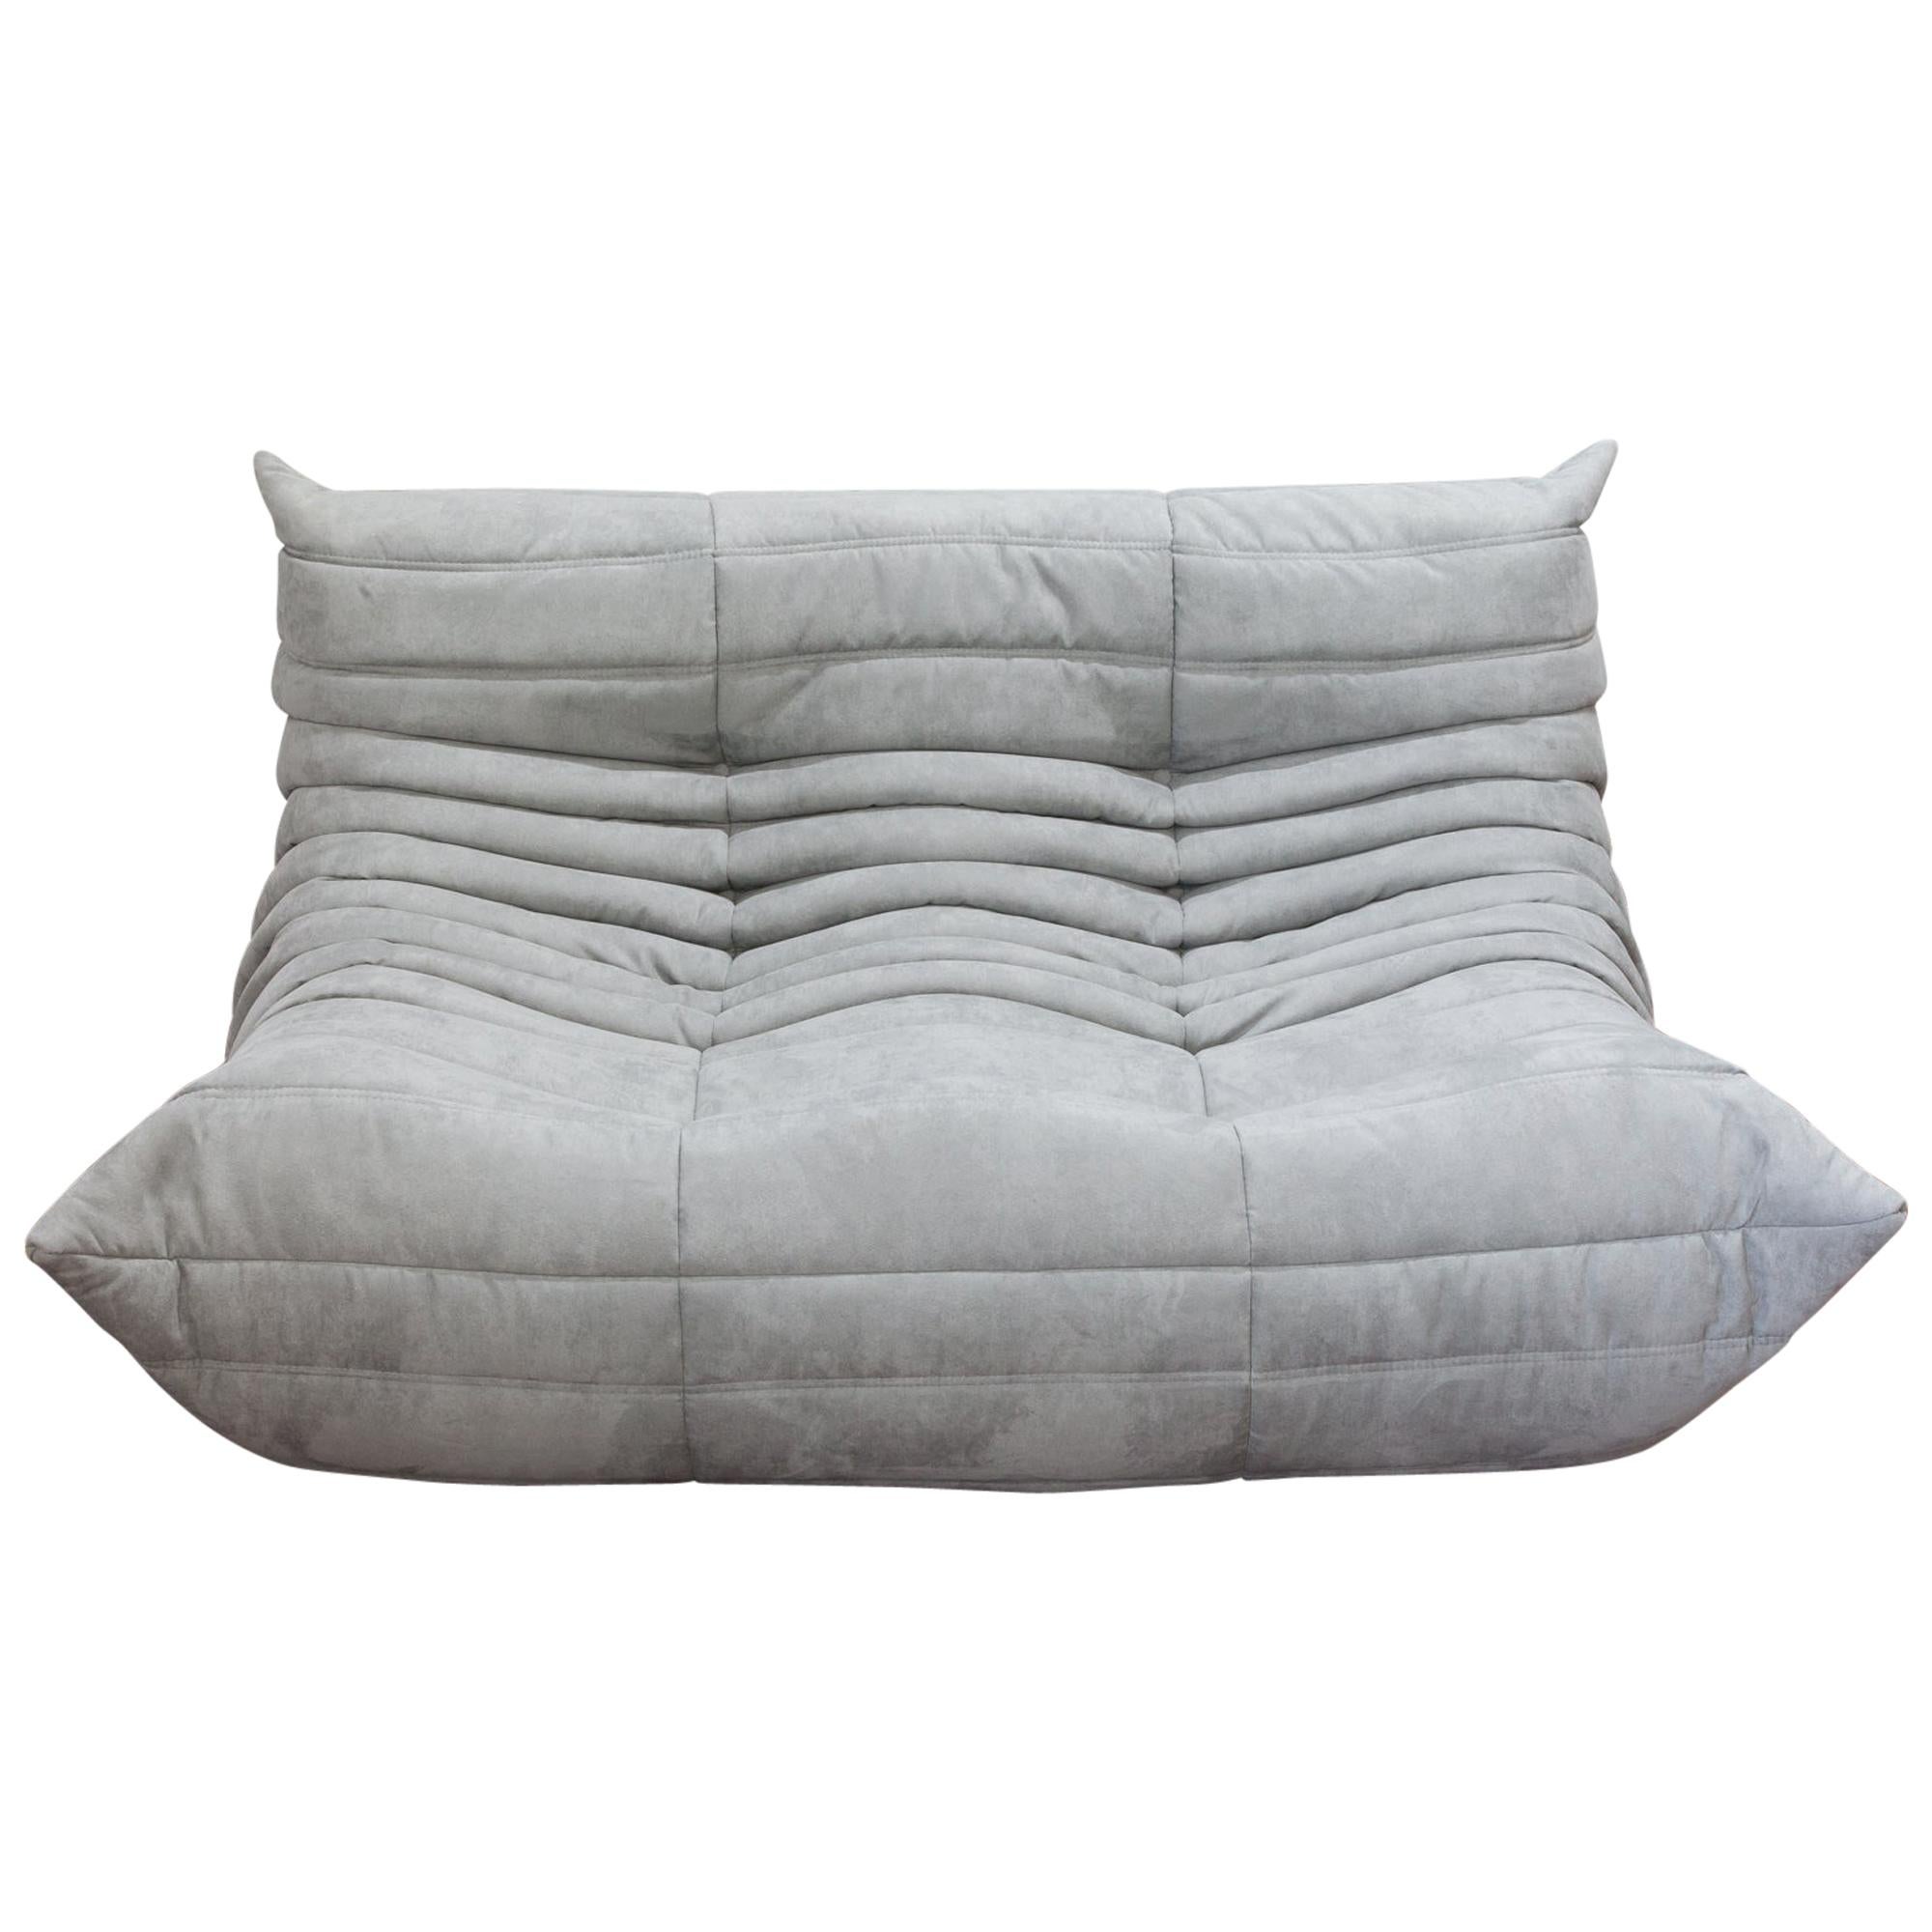 Togo 2-Seat Sofa in Light Grey Microfibre by Michel Ducaroy for Ligne Roset For Sale